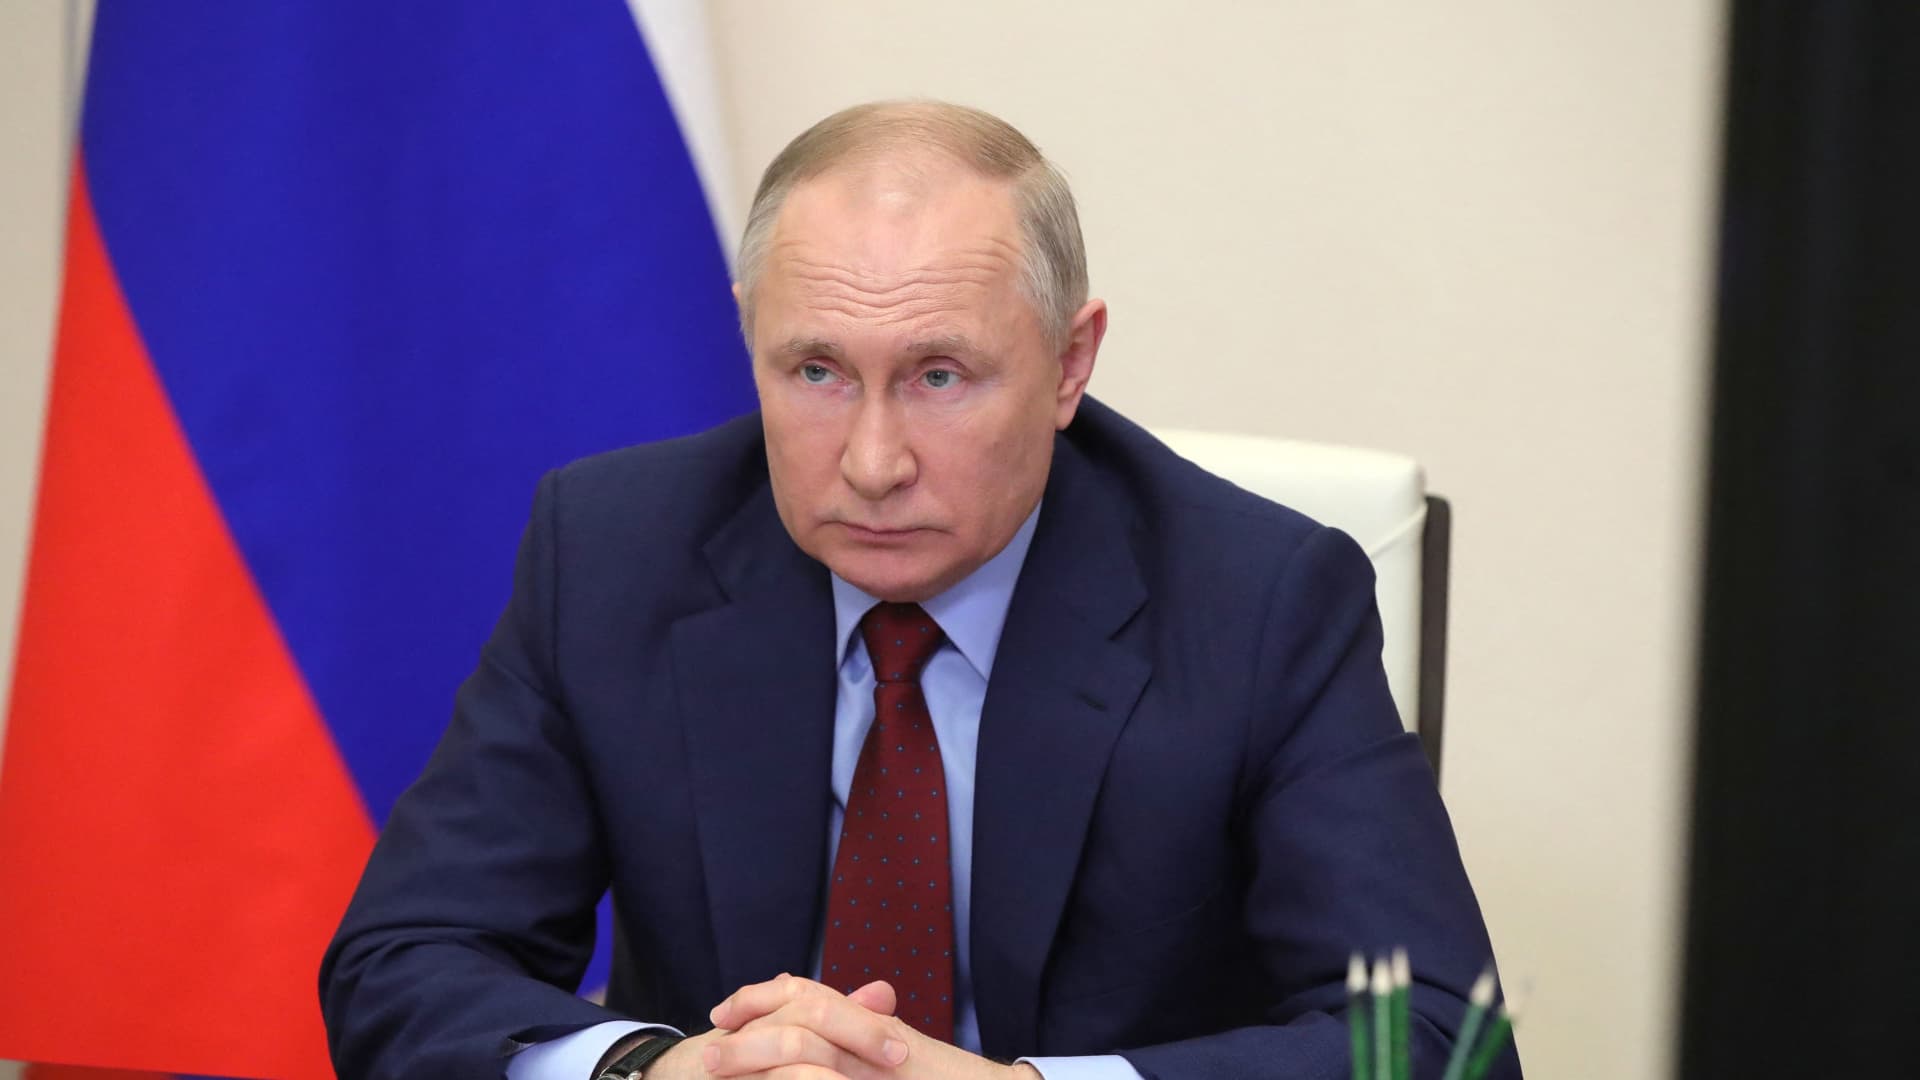 Putin warns Russia cannot be isolated from the West; U.S. and UK investigate reports of chemical weapons attack – CNBC